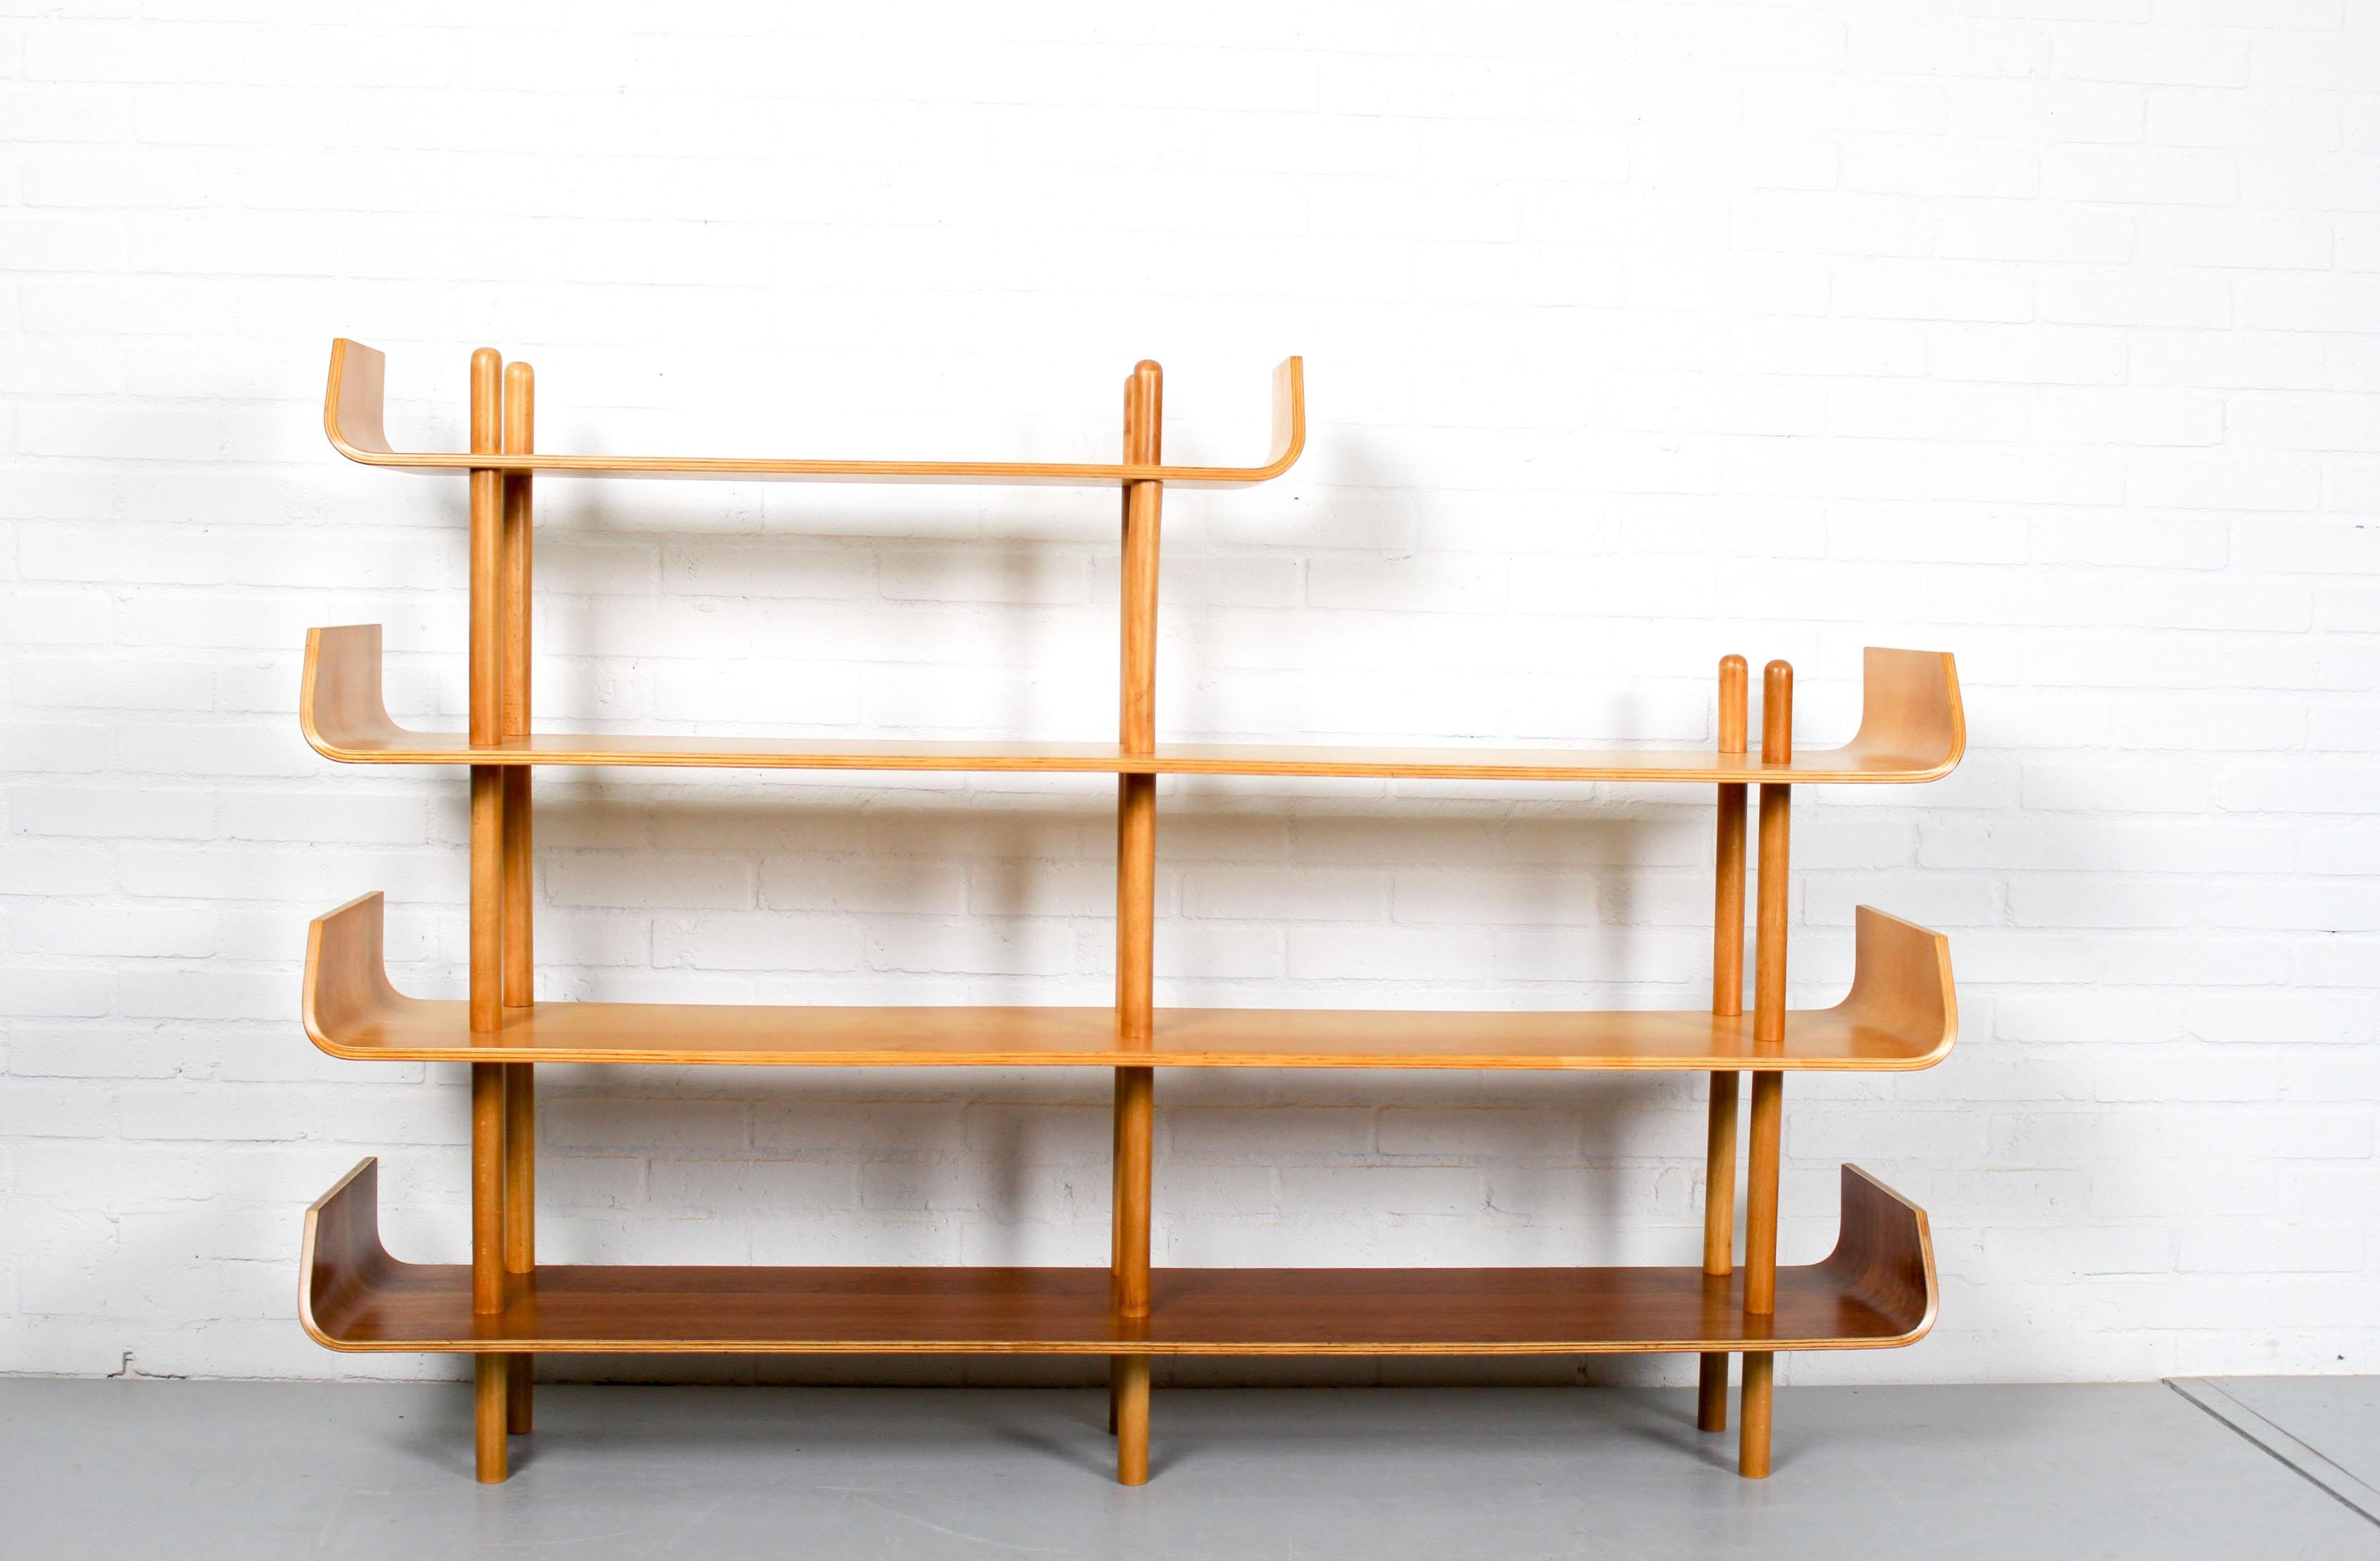 Bookshelf Model 545 by Willem Lutjens for Gouda den Boer, 1953. Made of beech plywood and teak plywood, timeless and organic design! The bentwood ends are typical for these bookshelves, they are connected by poles. The cabinet can be used as room